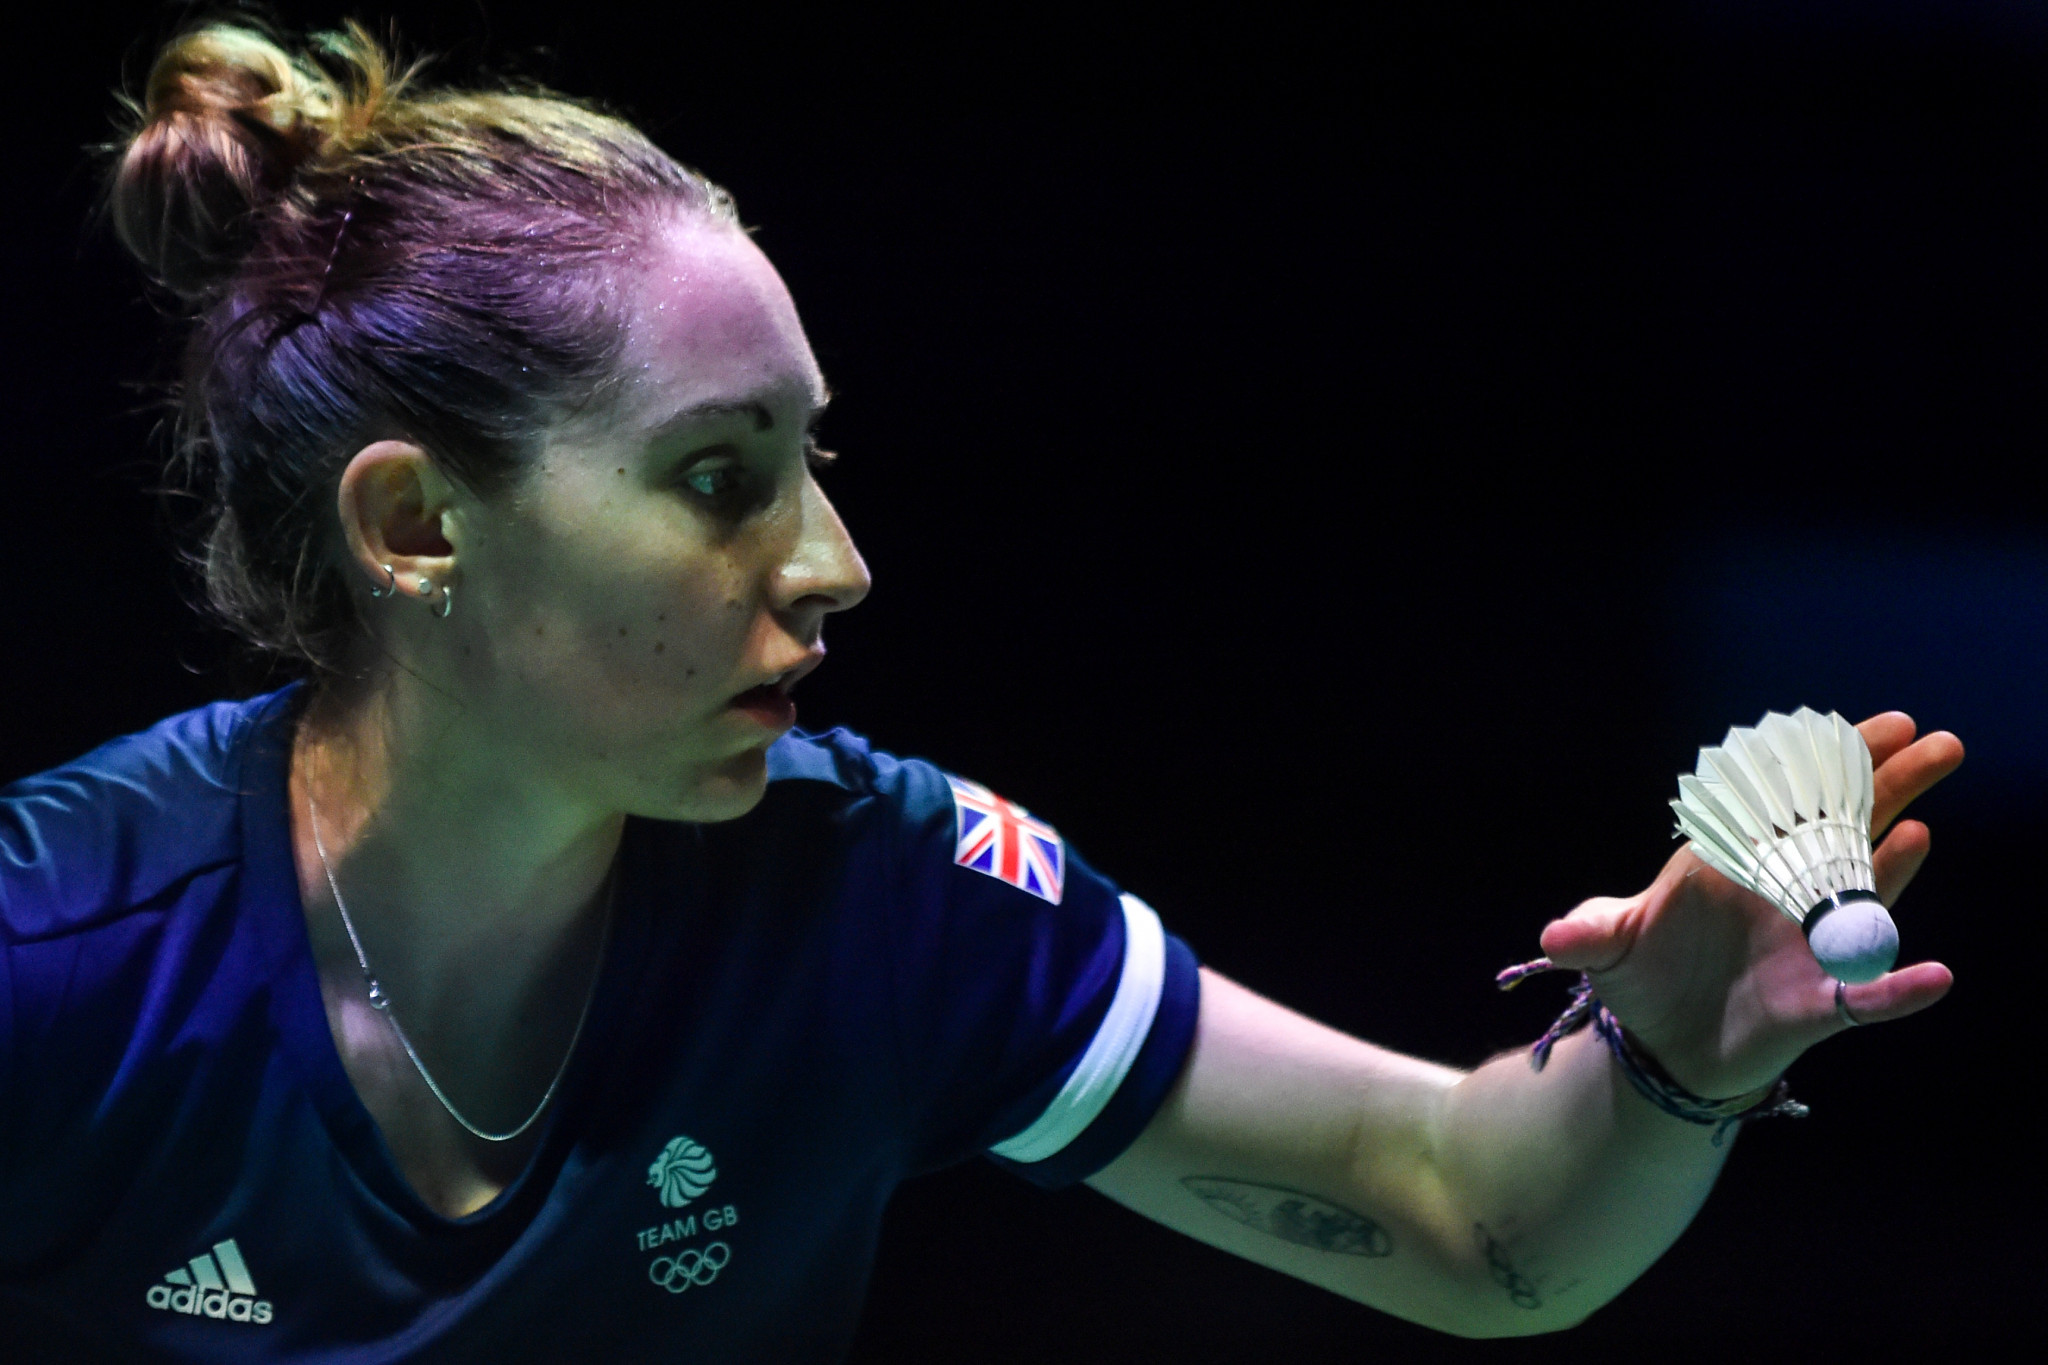 Top seed Kirsty Gilmour of Scotland is through to the quarter-finals of the women's singles event ©Getty Images